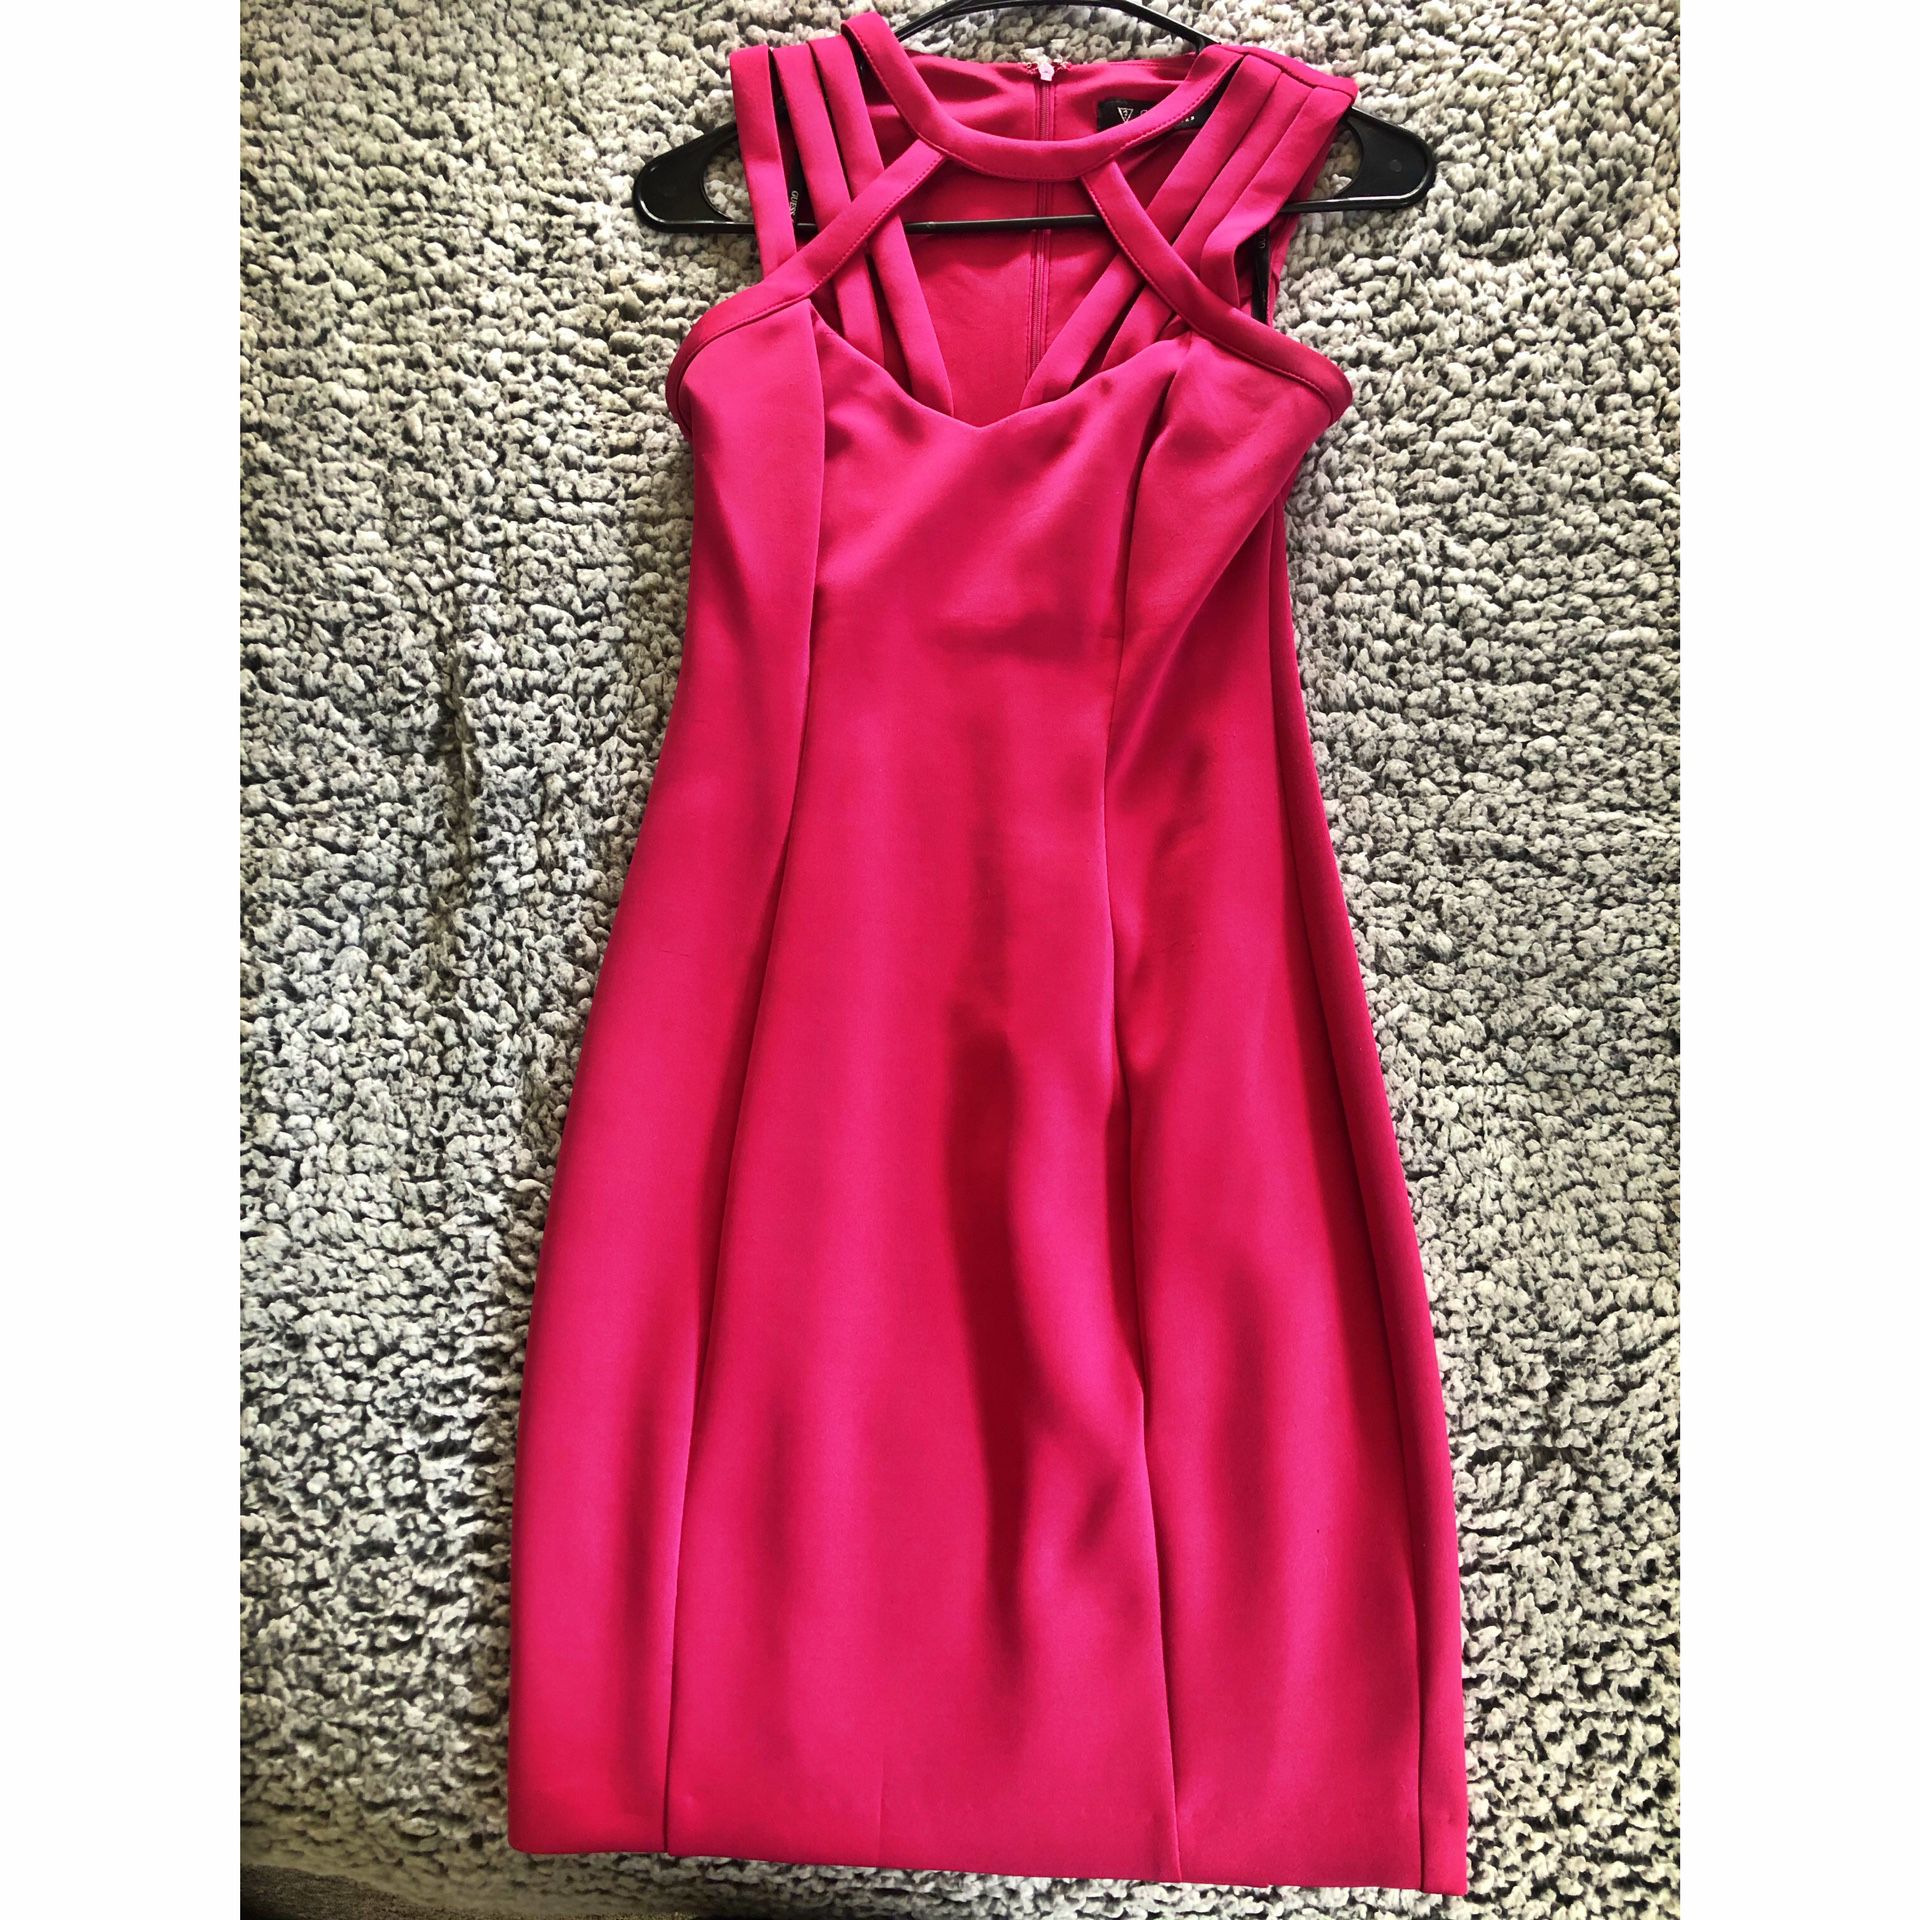 Guess Caged Bodycon Dress